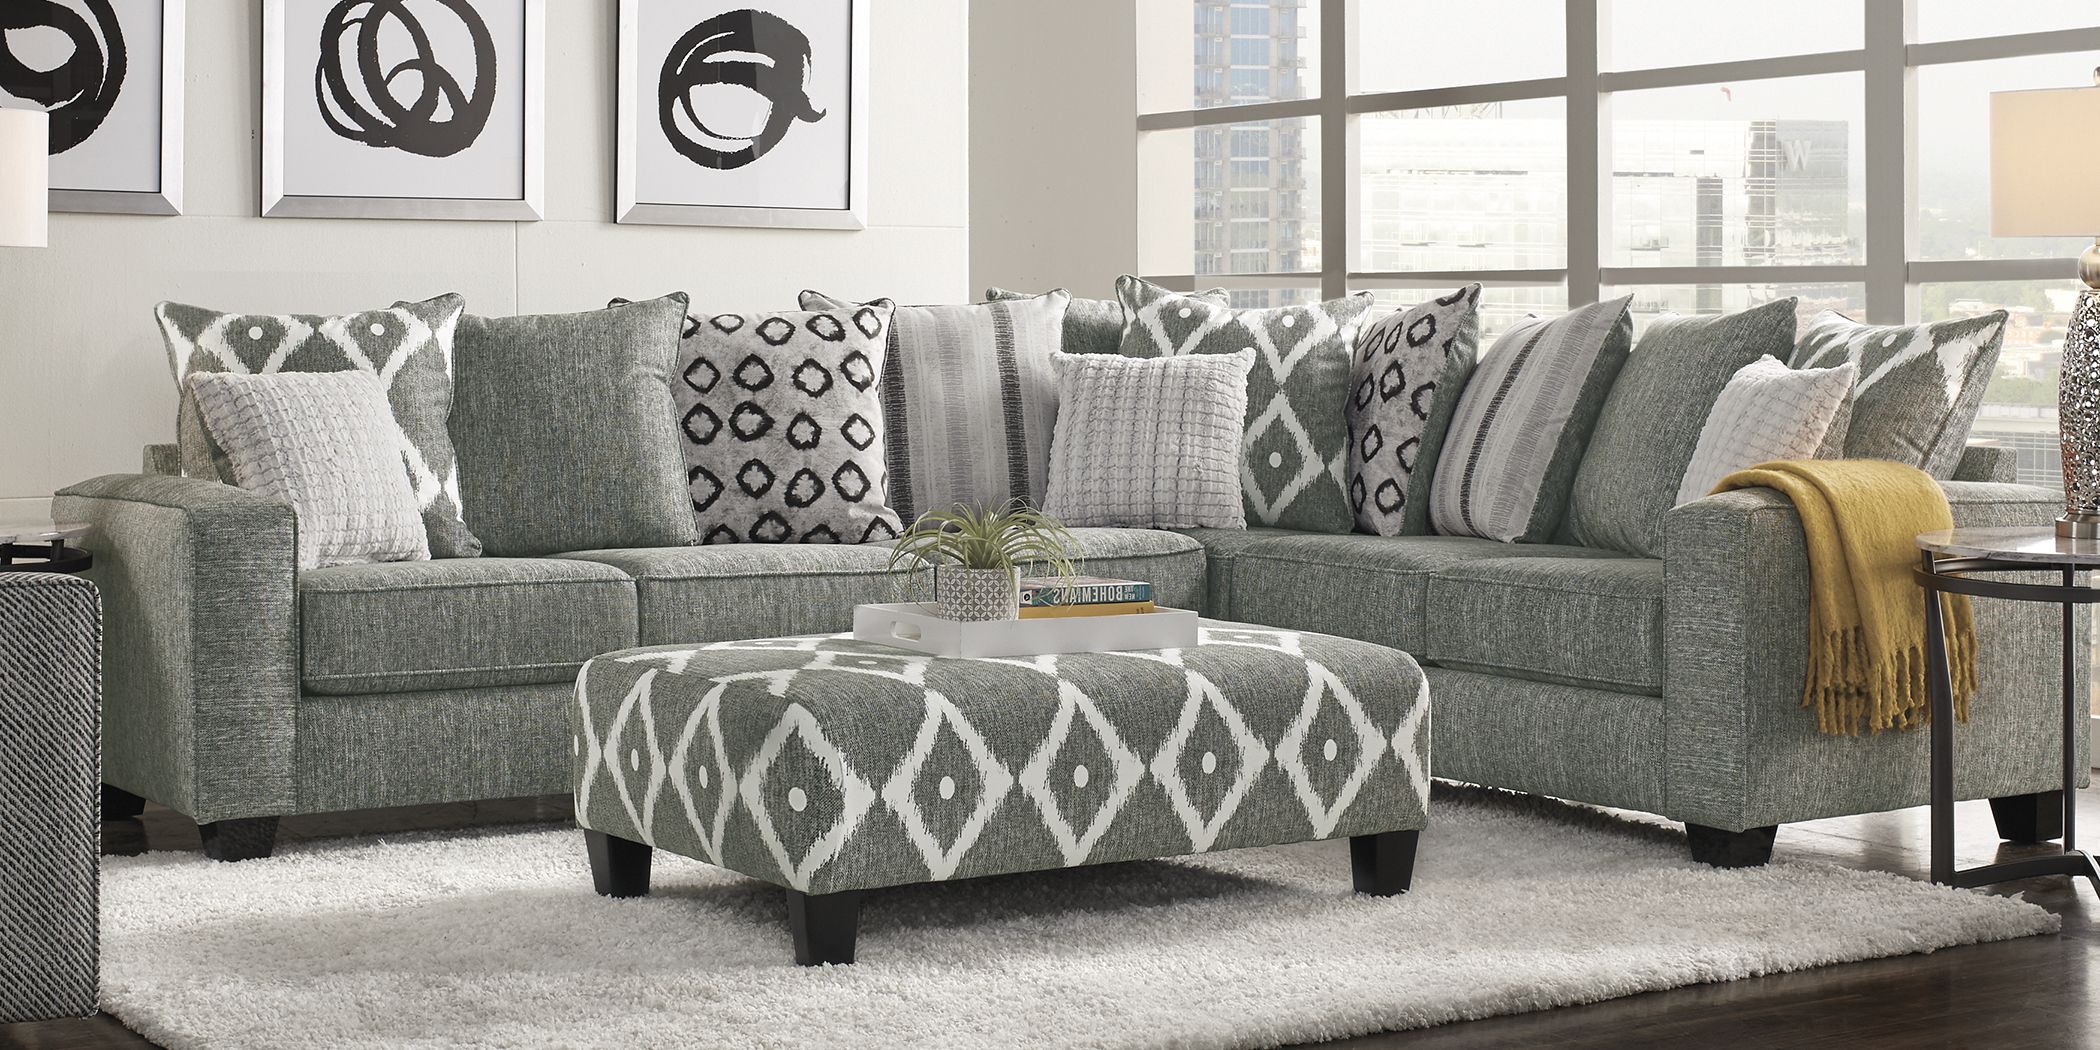 5 Piece Living Room Furniture Sets With Sofas